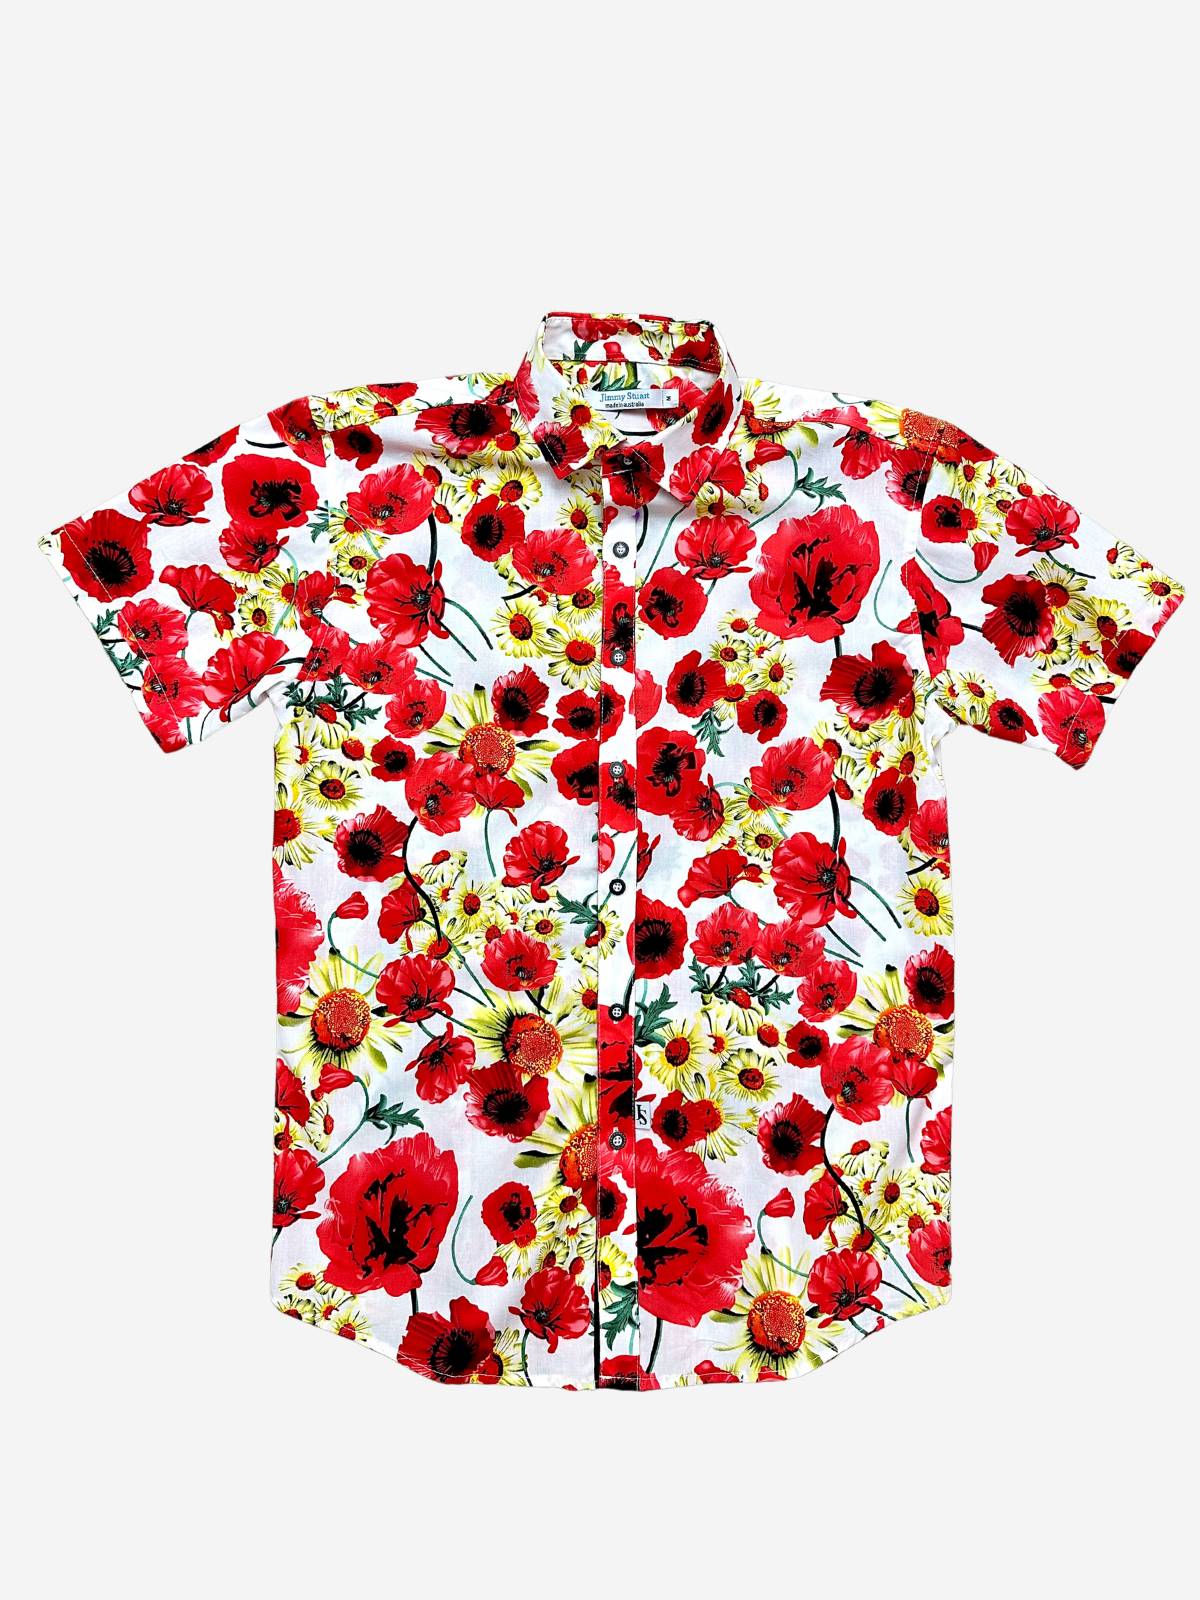 Heroine Floral Cotton S/S Shirt - Red